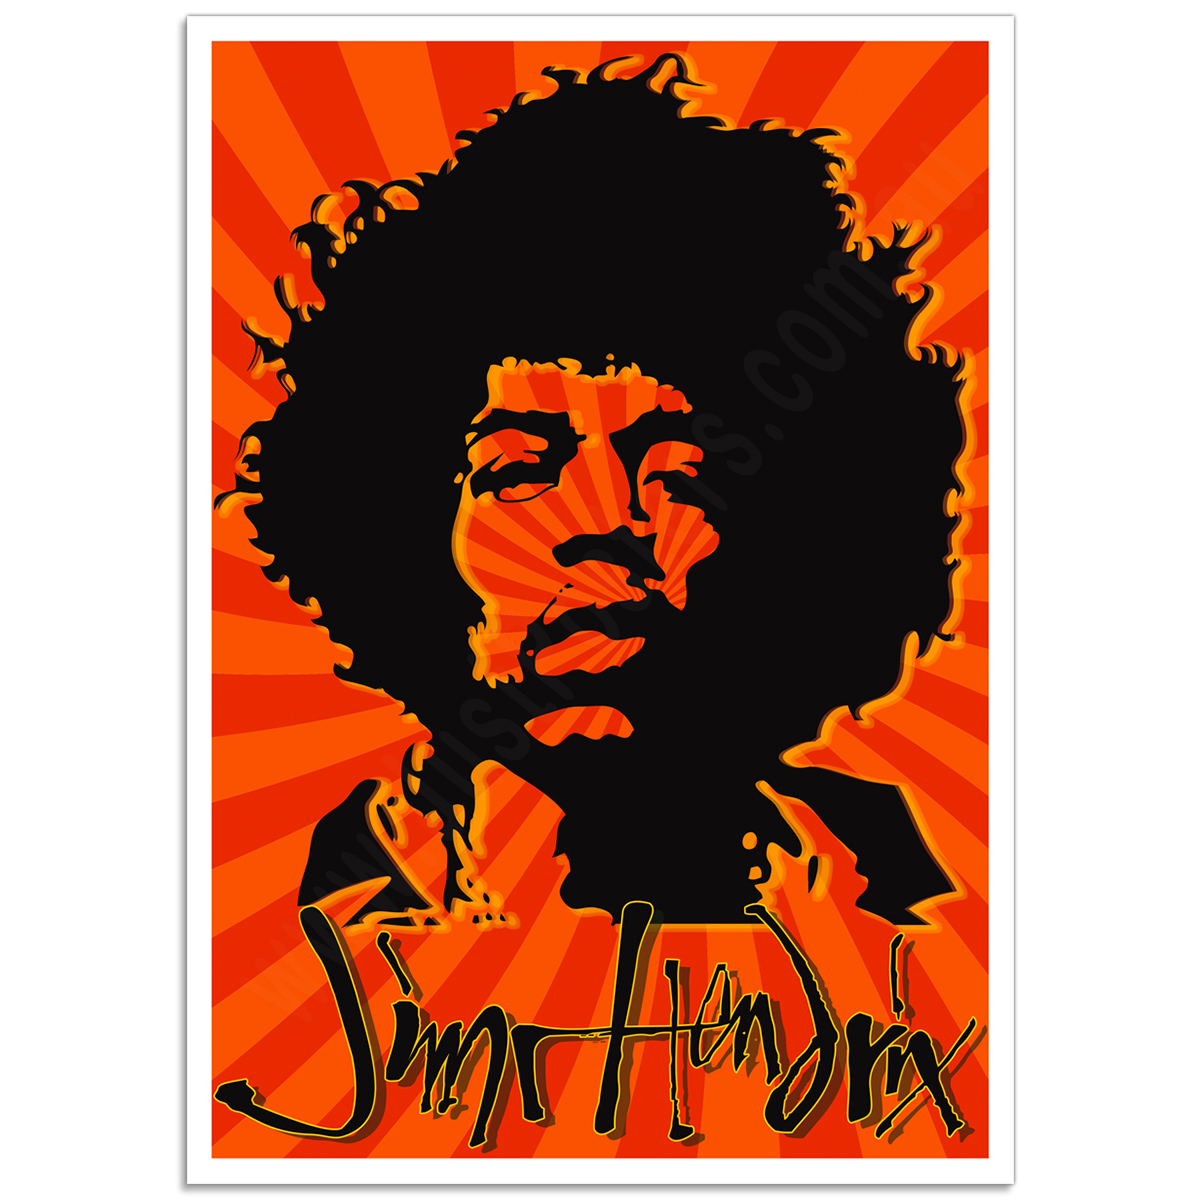 People Poster - Psychedelic Jimi Hendrix